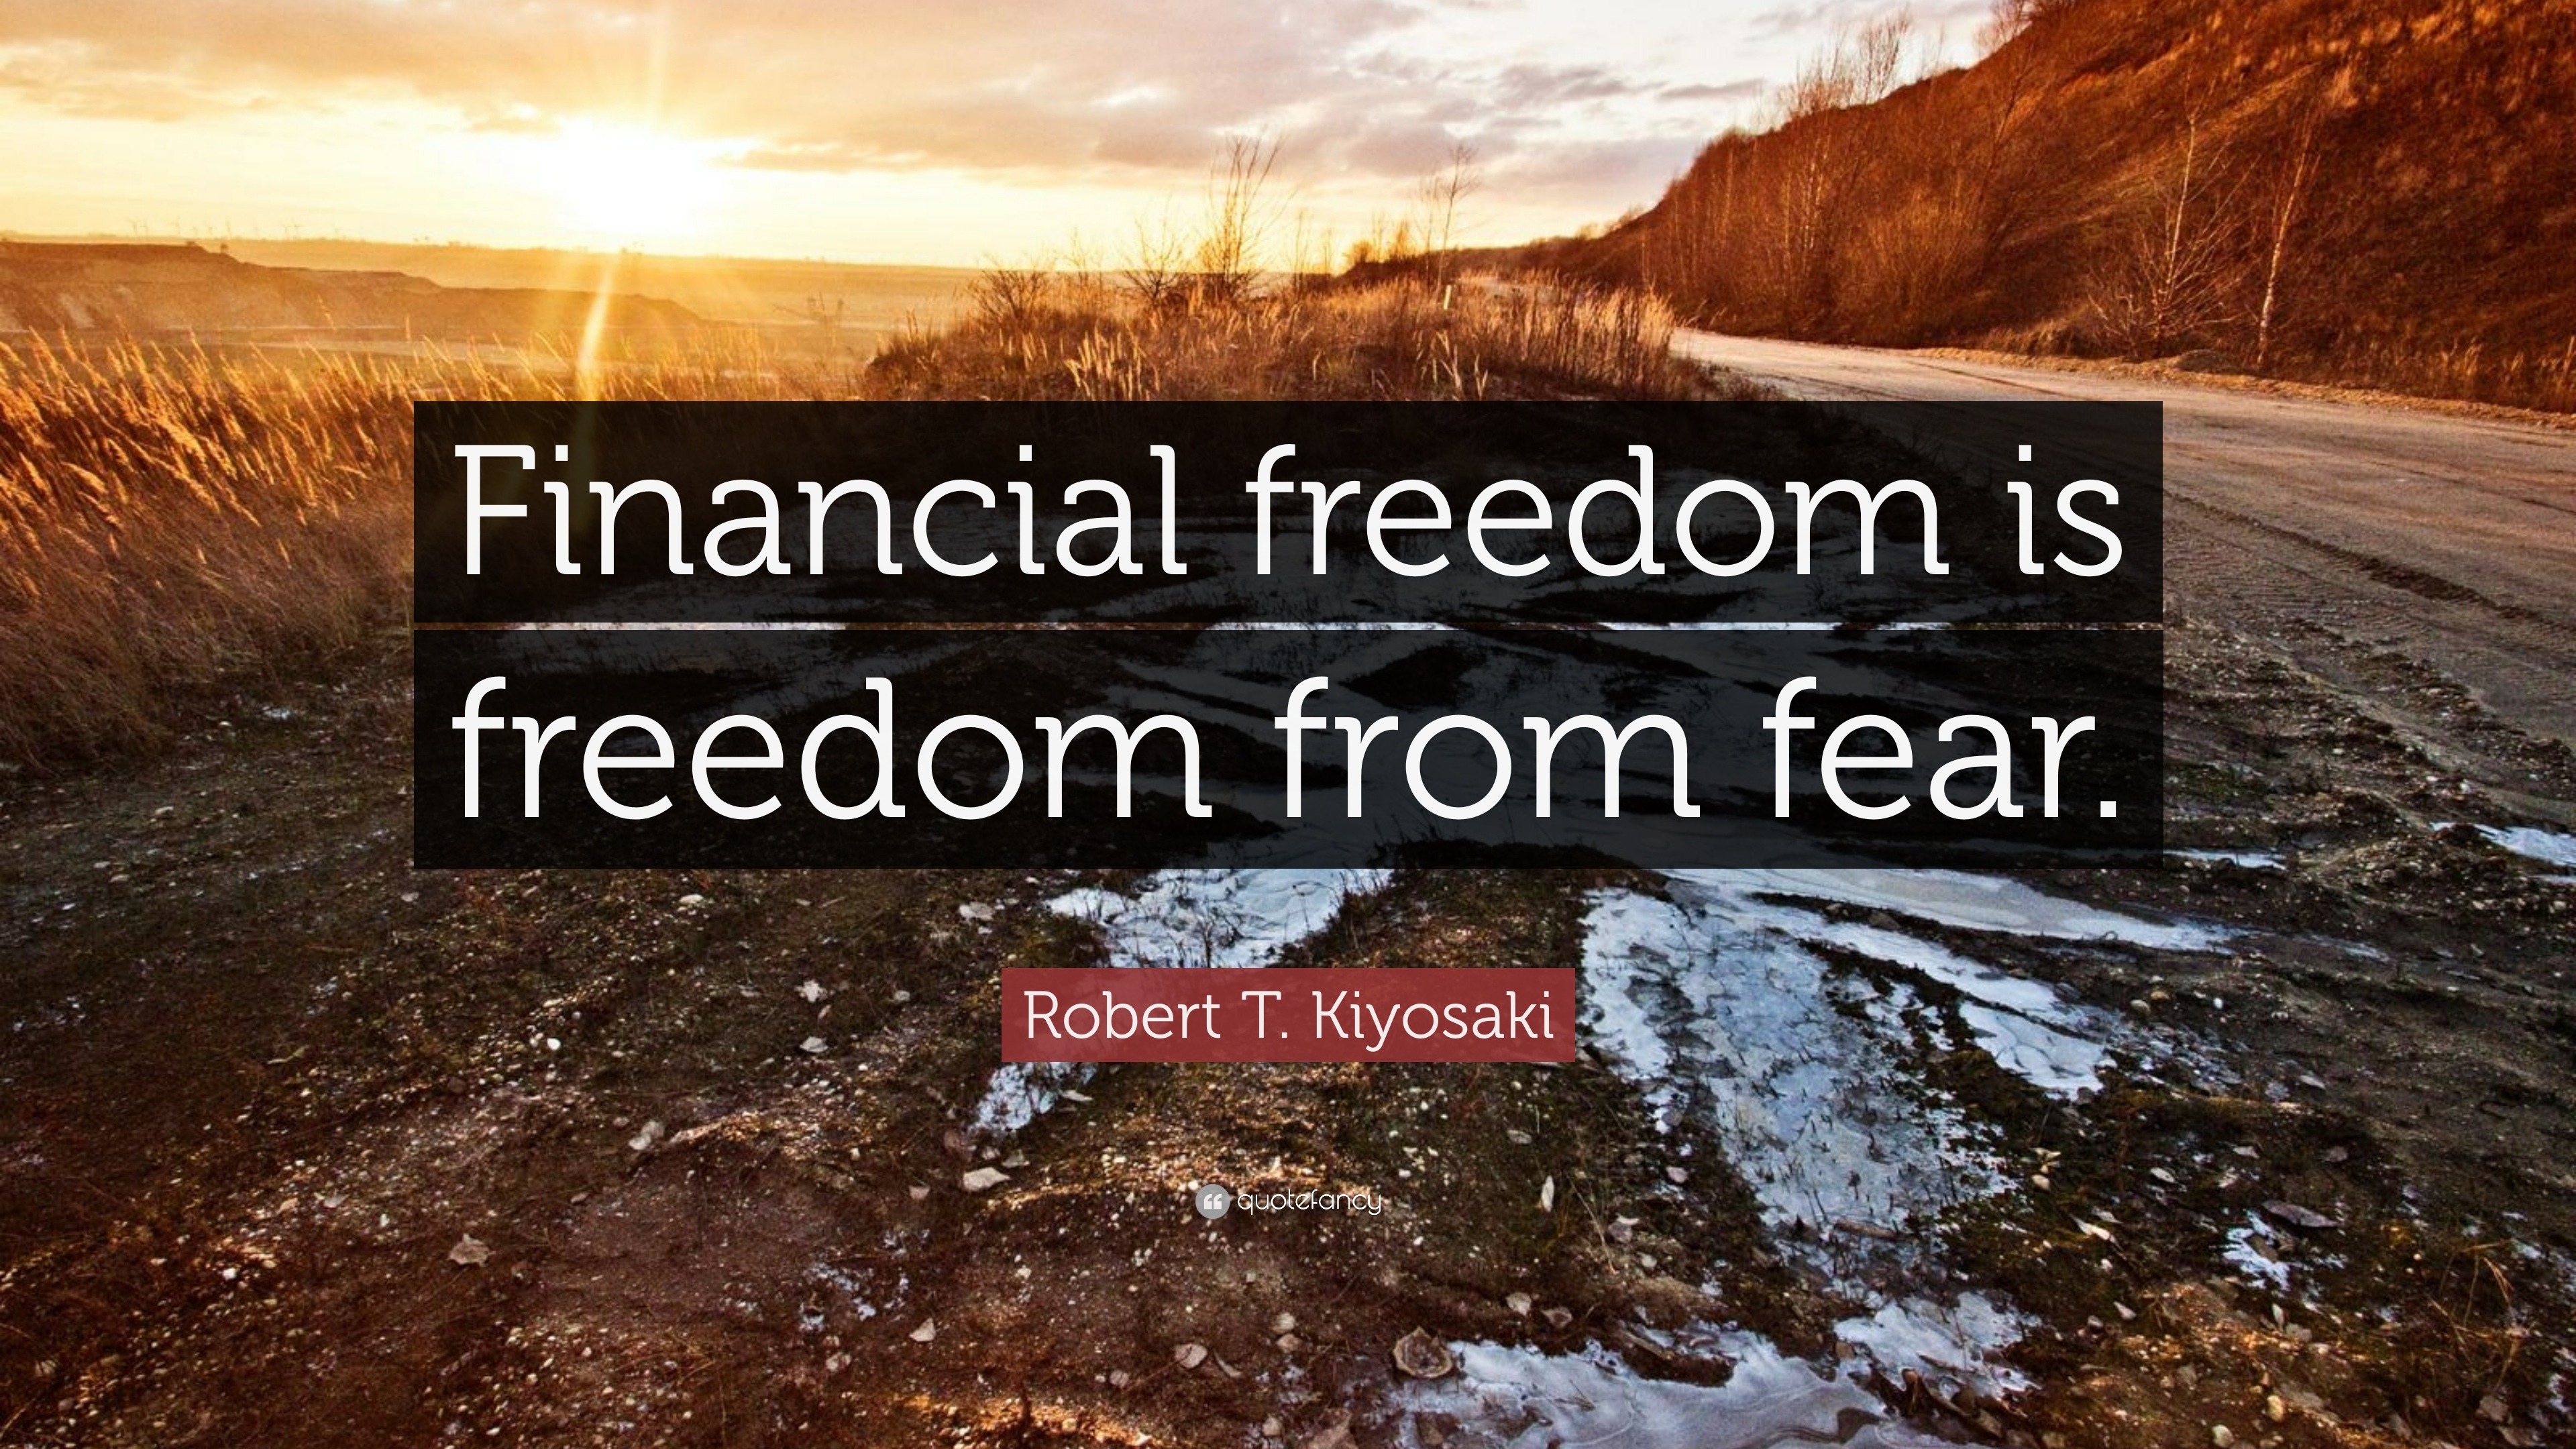 Robert T. Kiyosaki Quote: “Financial freedom is freedom from fear.”